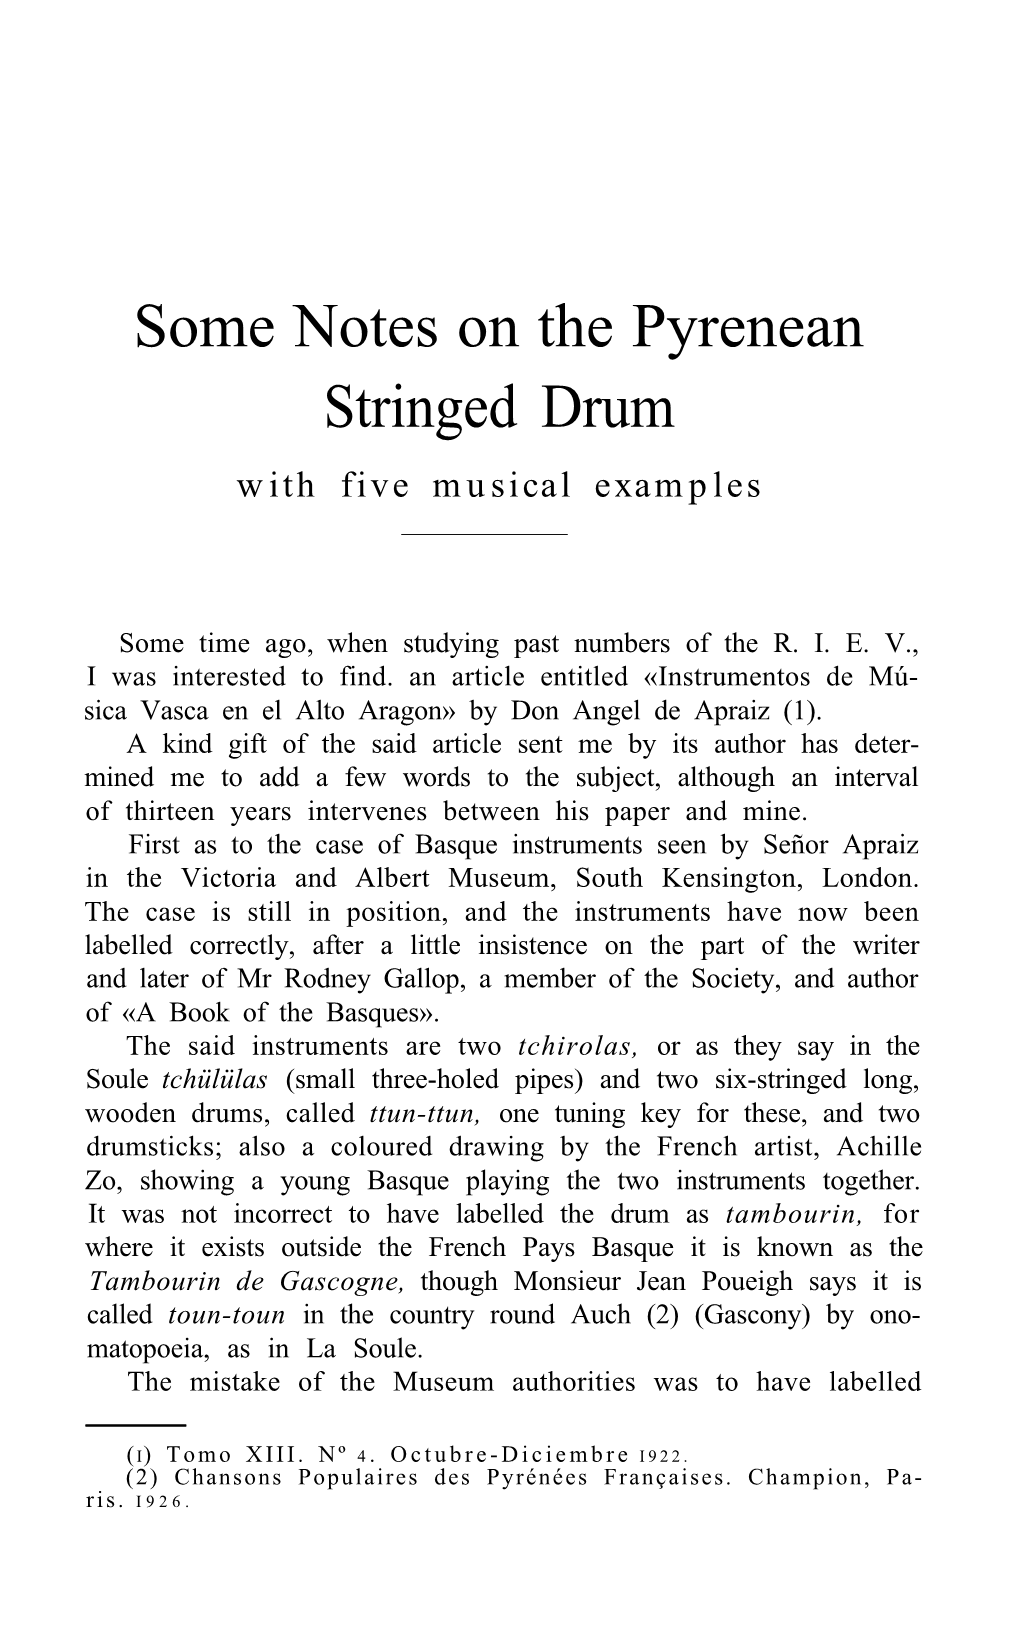 Some Notes on the Pyrenean Stringed Drum with Five Musical Examples